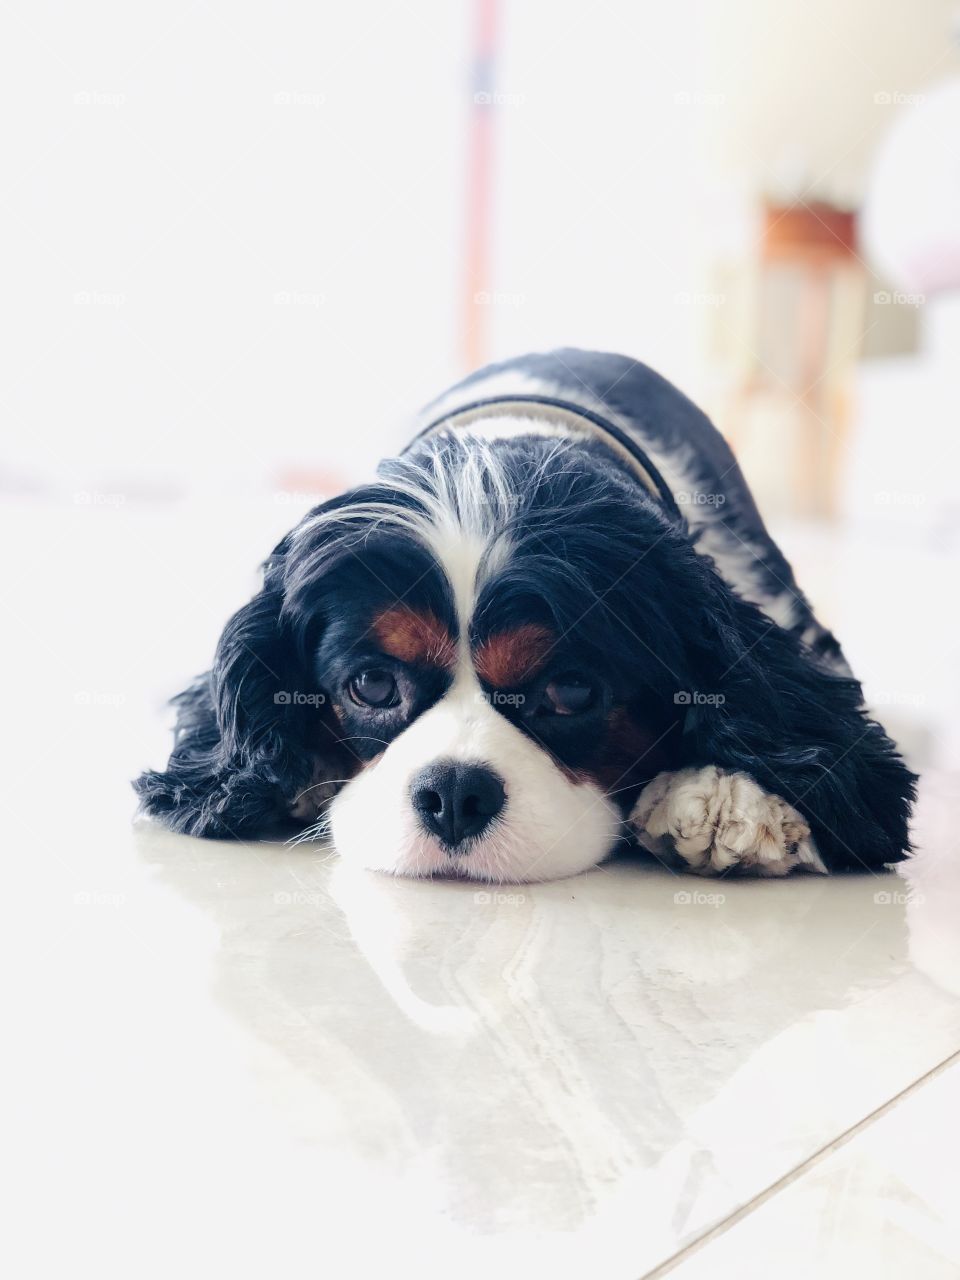 Cute Cavalier King Charles puppy looking at the camera with a sad face.